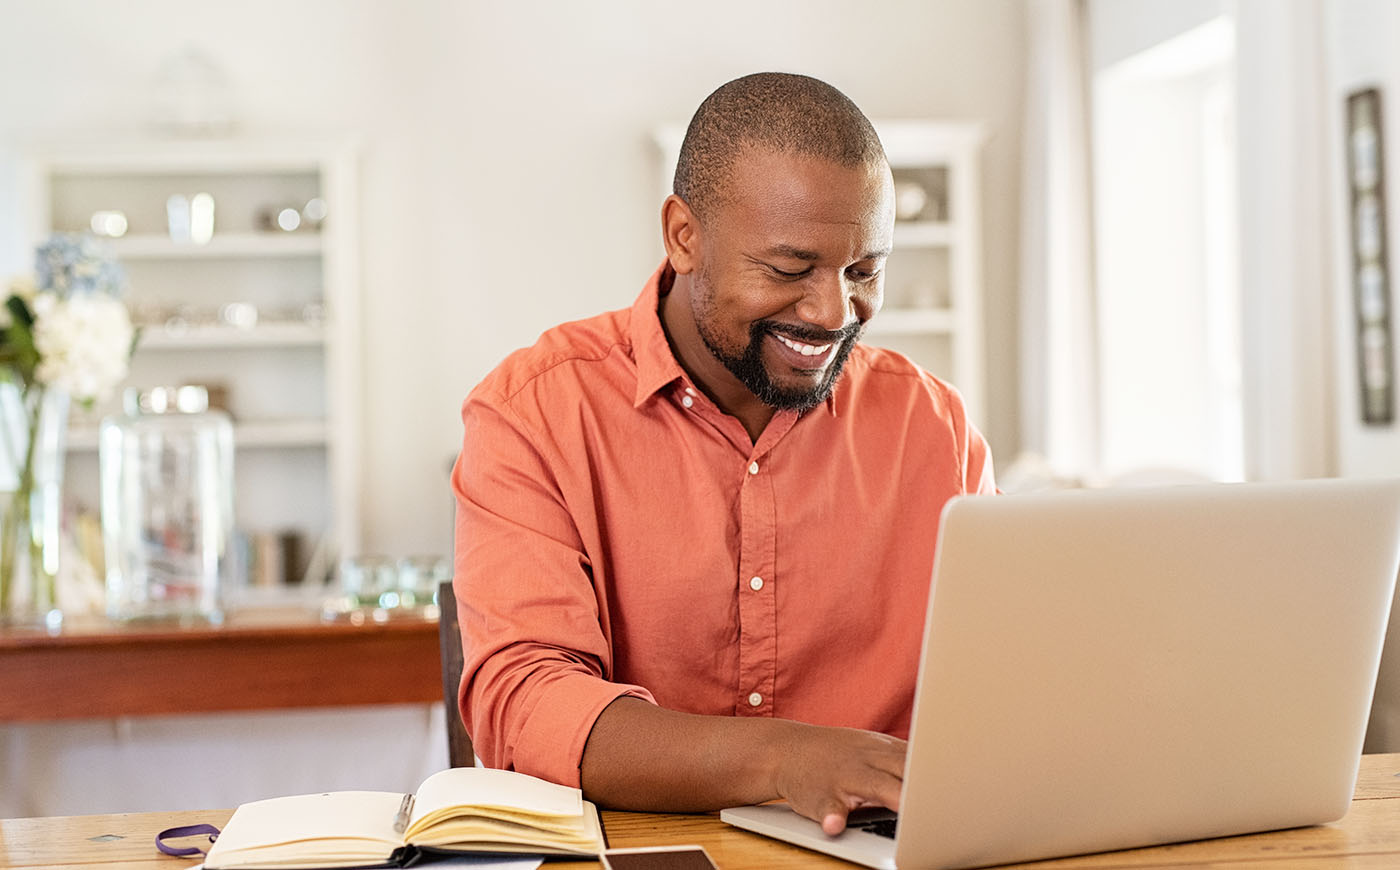 Smiling Black man using laptop at home in living room